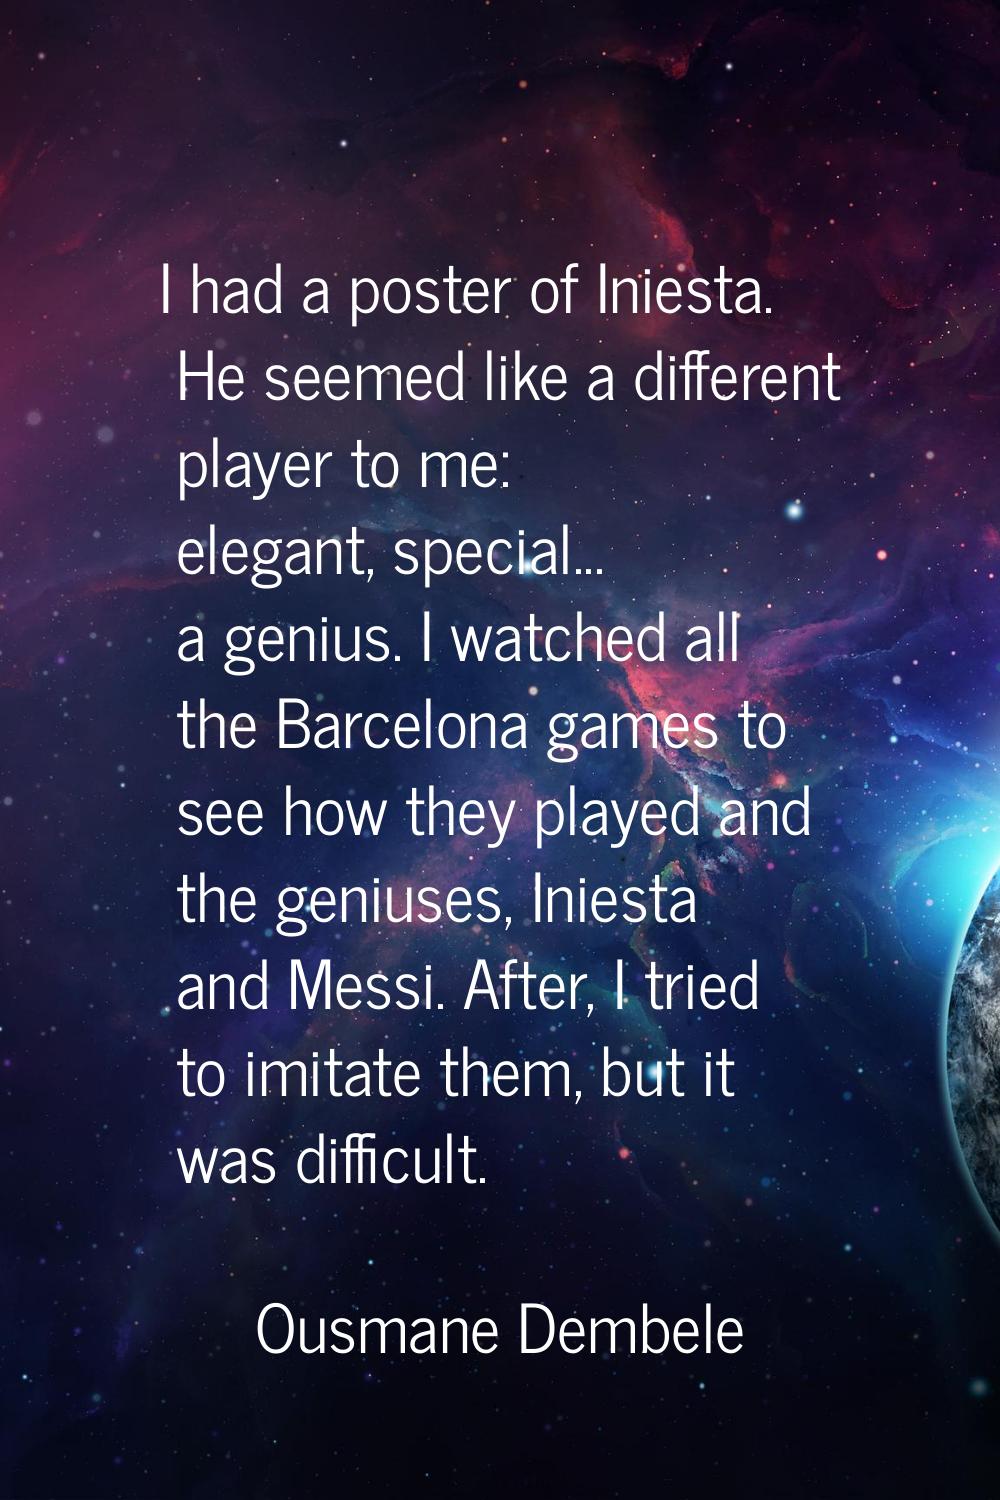 I had a poster of Iniesta. He seemed like a different player to me: elegant, special... a genius. I